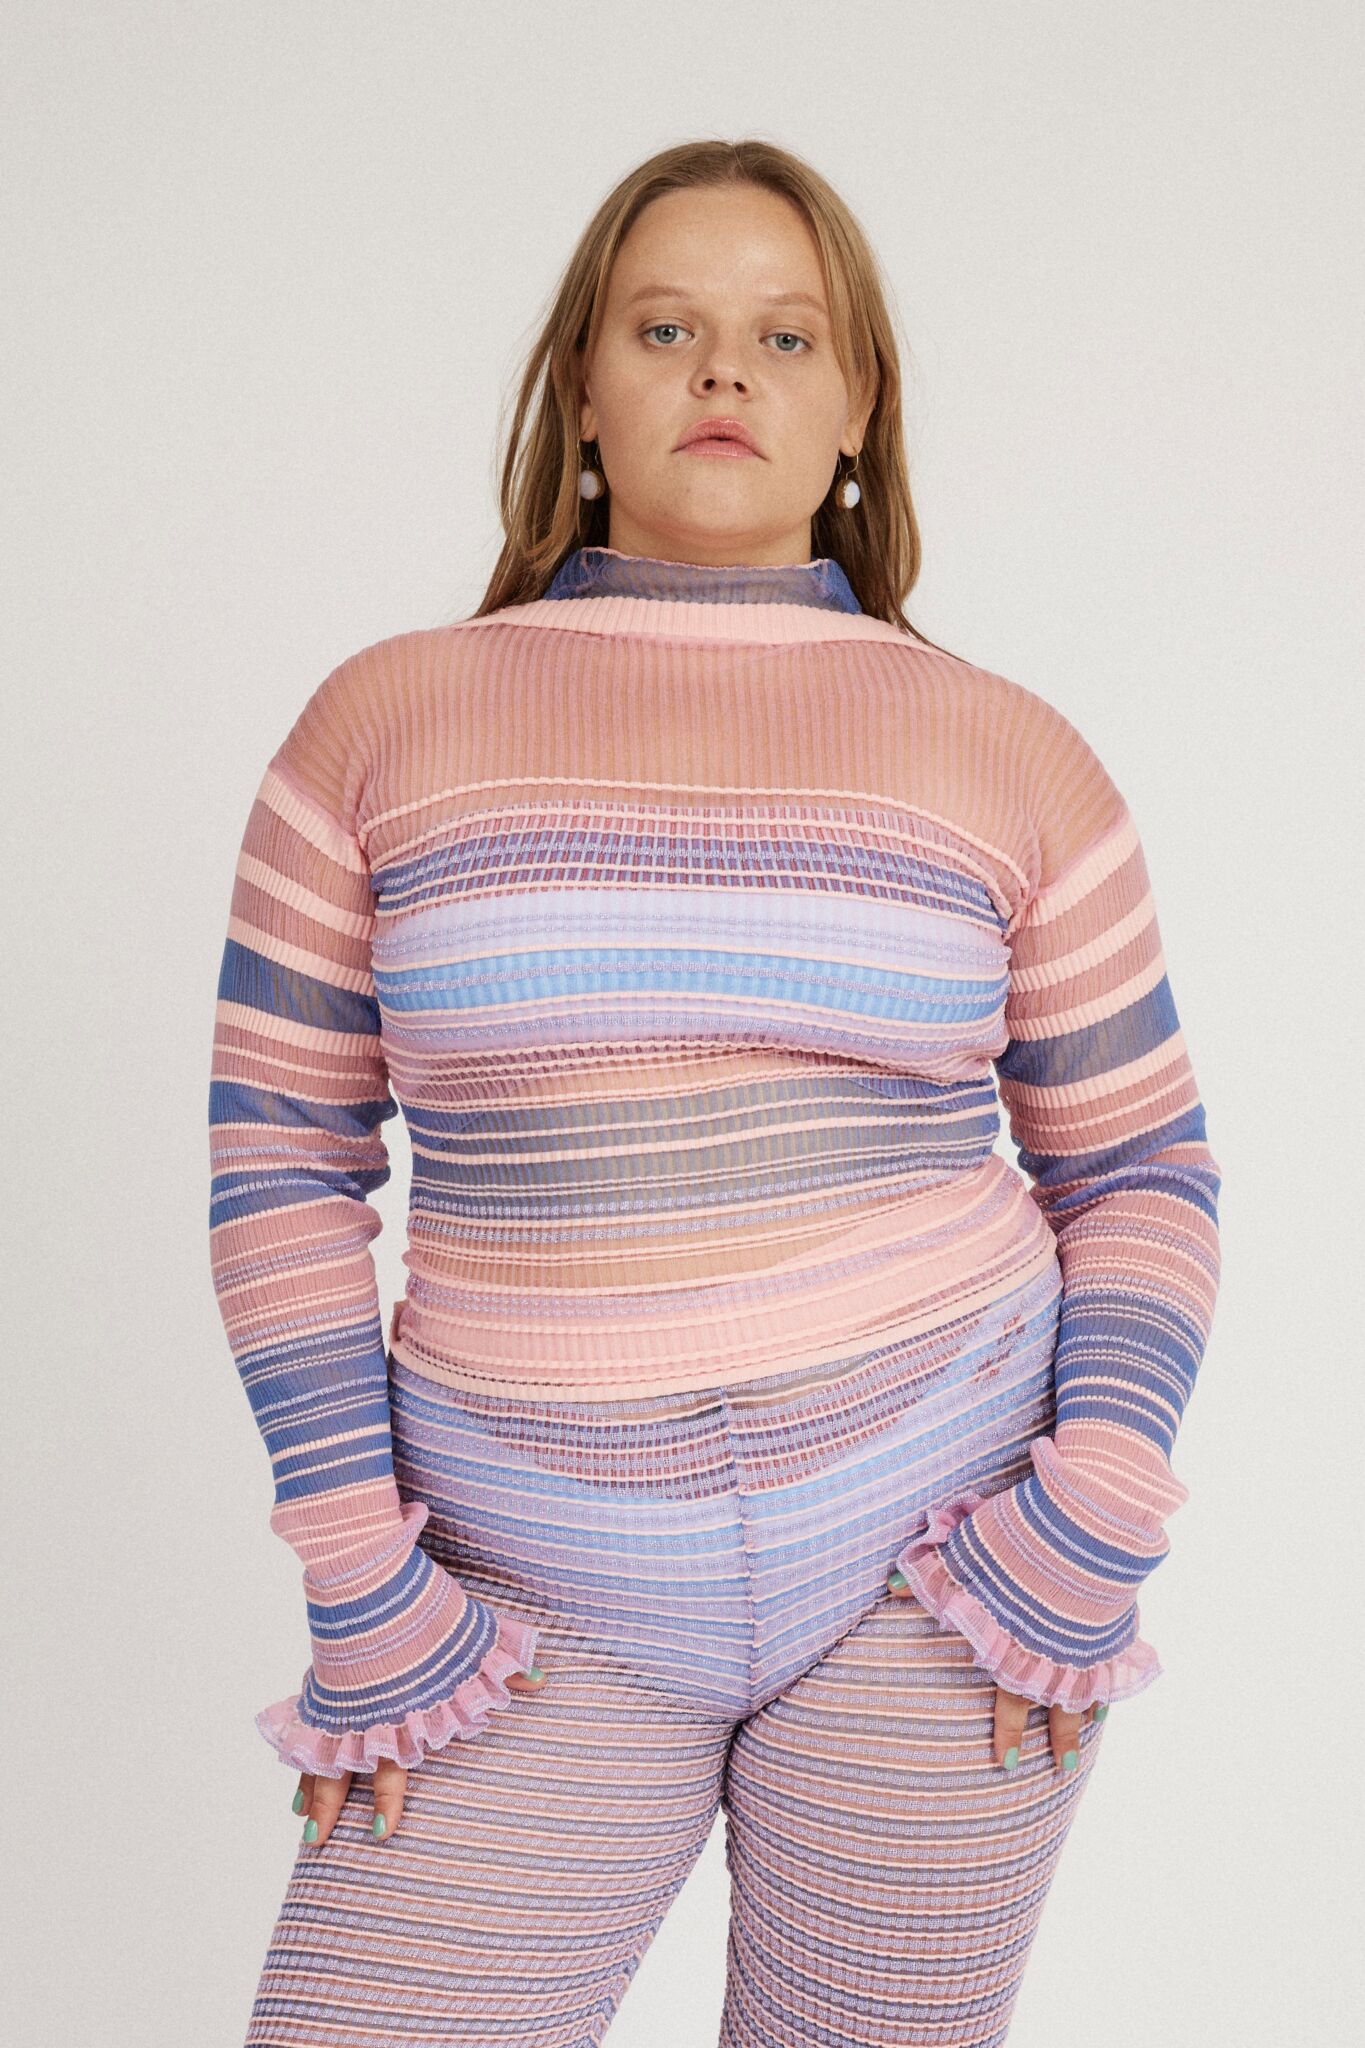 Sweet Secret Jumper in pink and powder blue is a knitted transparent high neck jumper in all over bold stripes detailed with shimmery metallized yarn. The textile is lightweight, delicate and very flexible. The jumper has a body fitted silhouette that adapts to the body. Detailed with frills and a logo in the back of the neck.